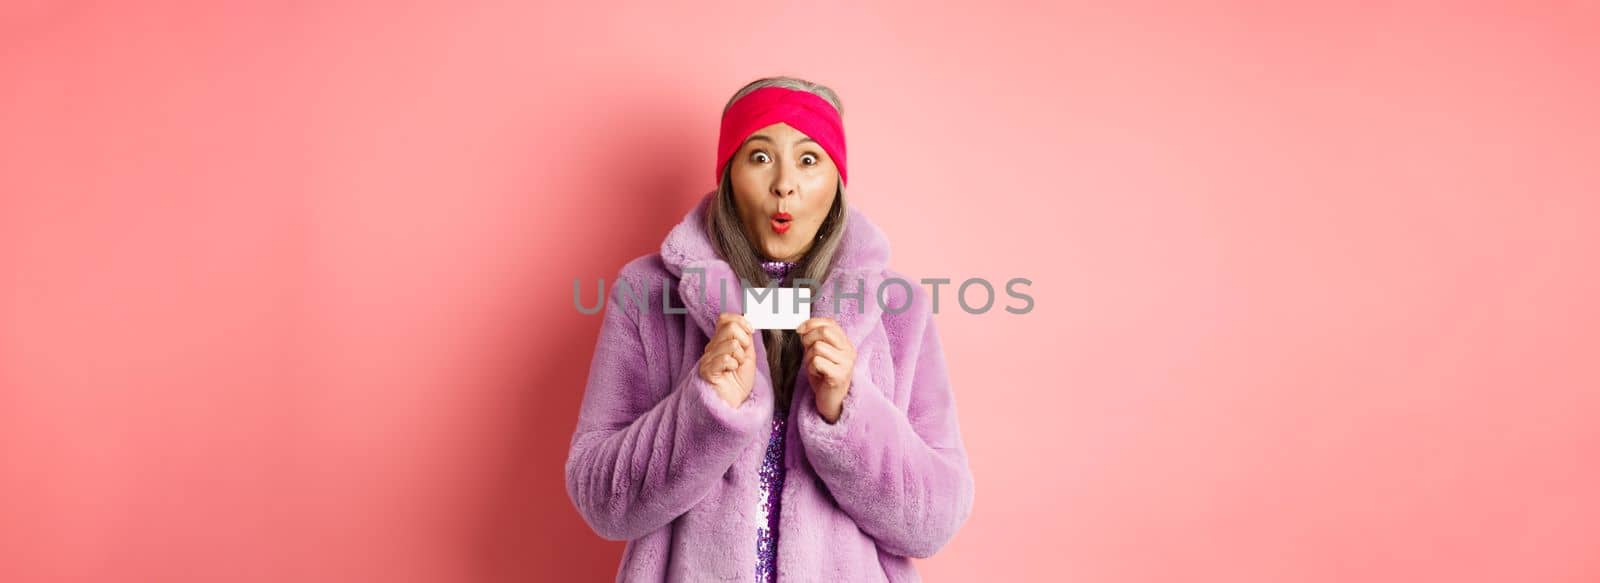 Shopping and fashion concept. Image of amazed asian senior woman checking out promo offer, holding plastic credit card and stare impressed at camera, pink background.